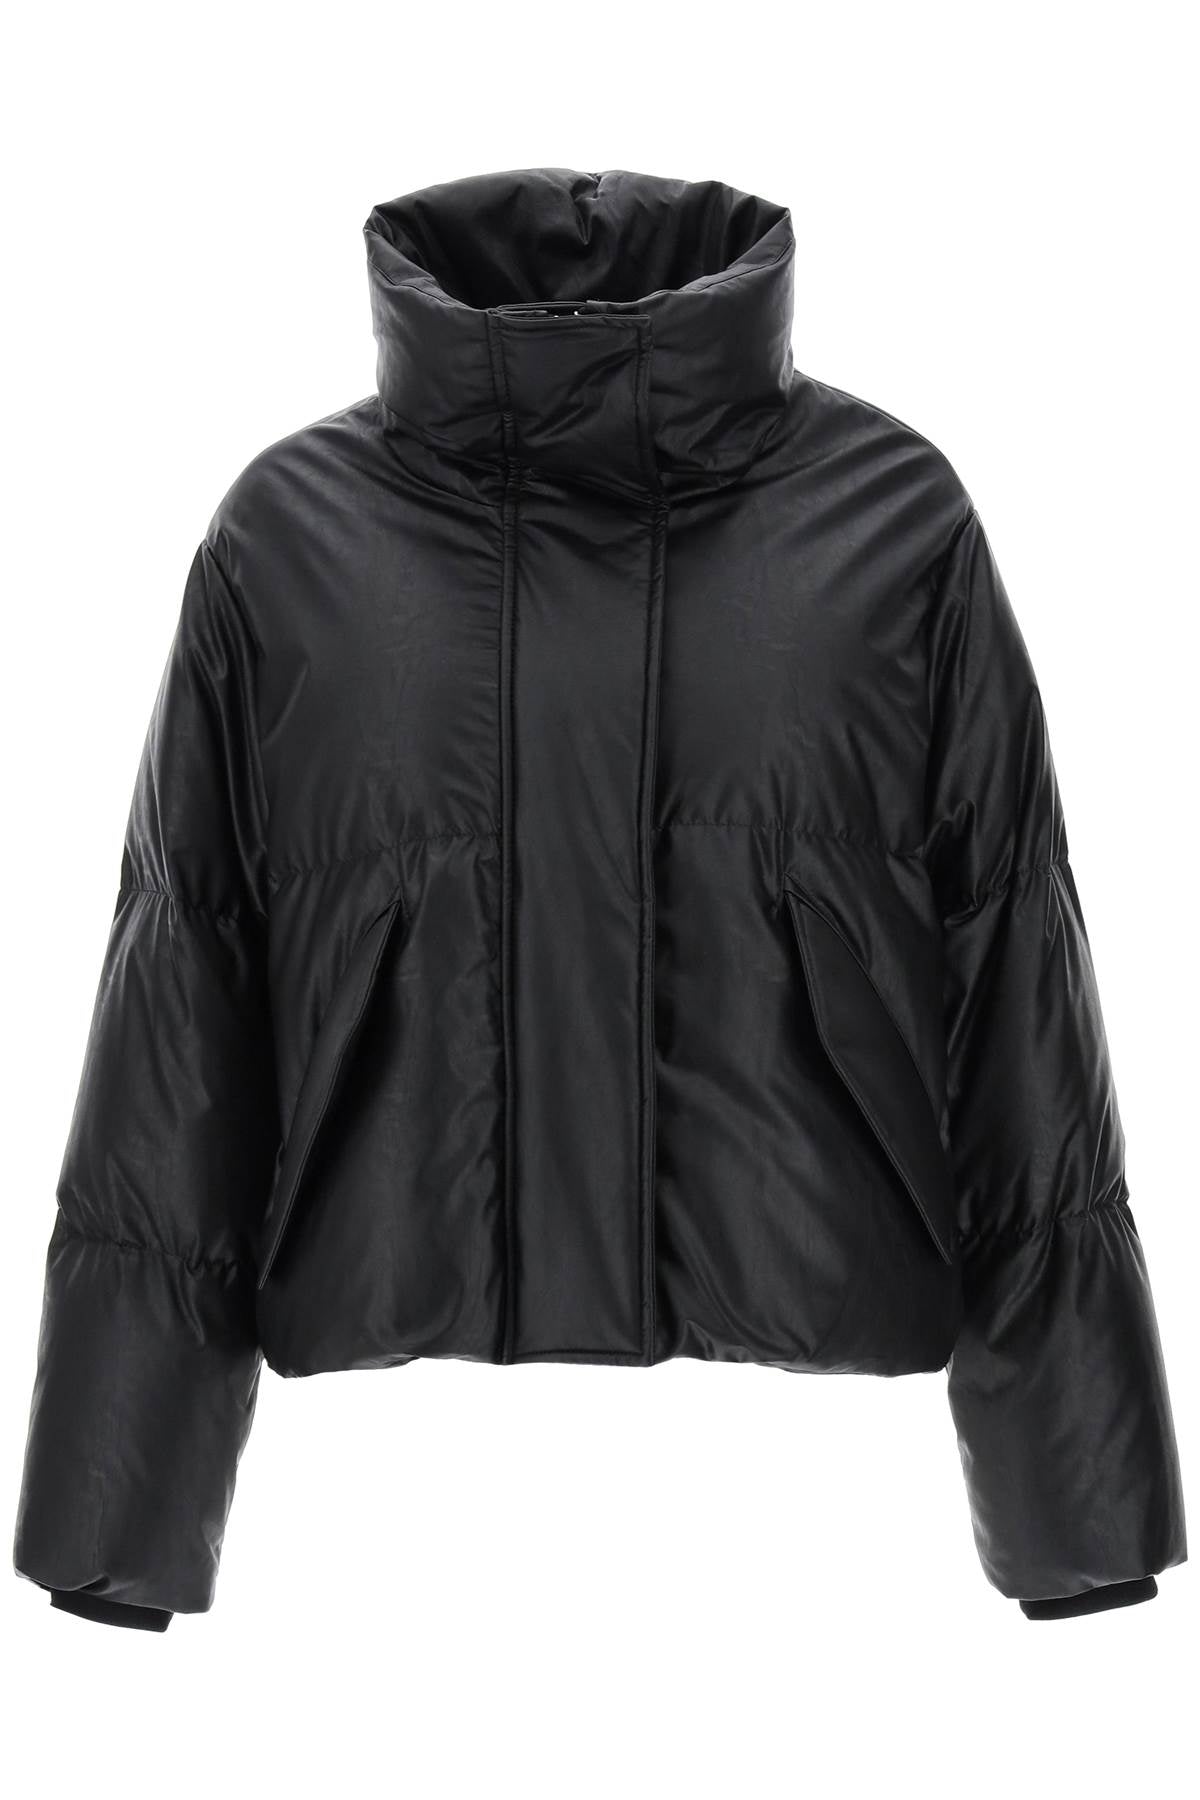 Mm6 maison margiela faux leather puffer jacket with back logo embroidery-0